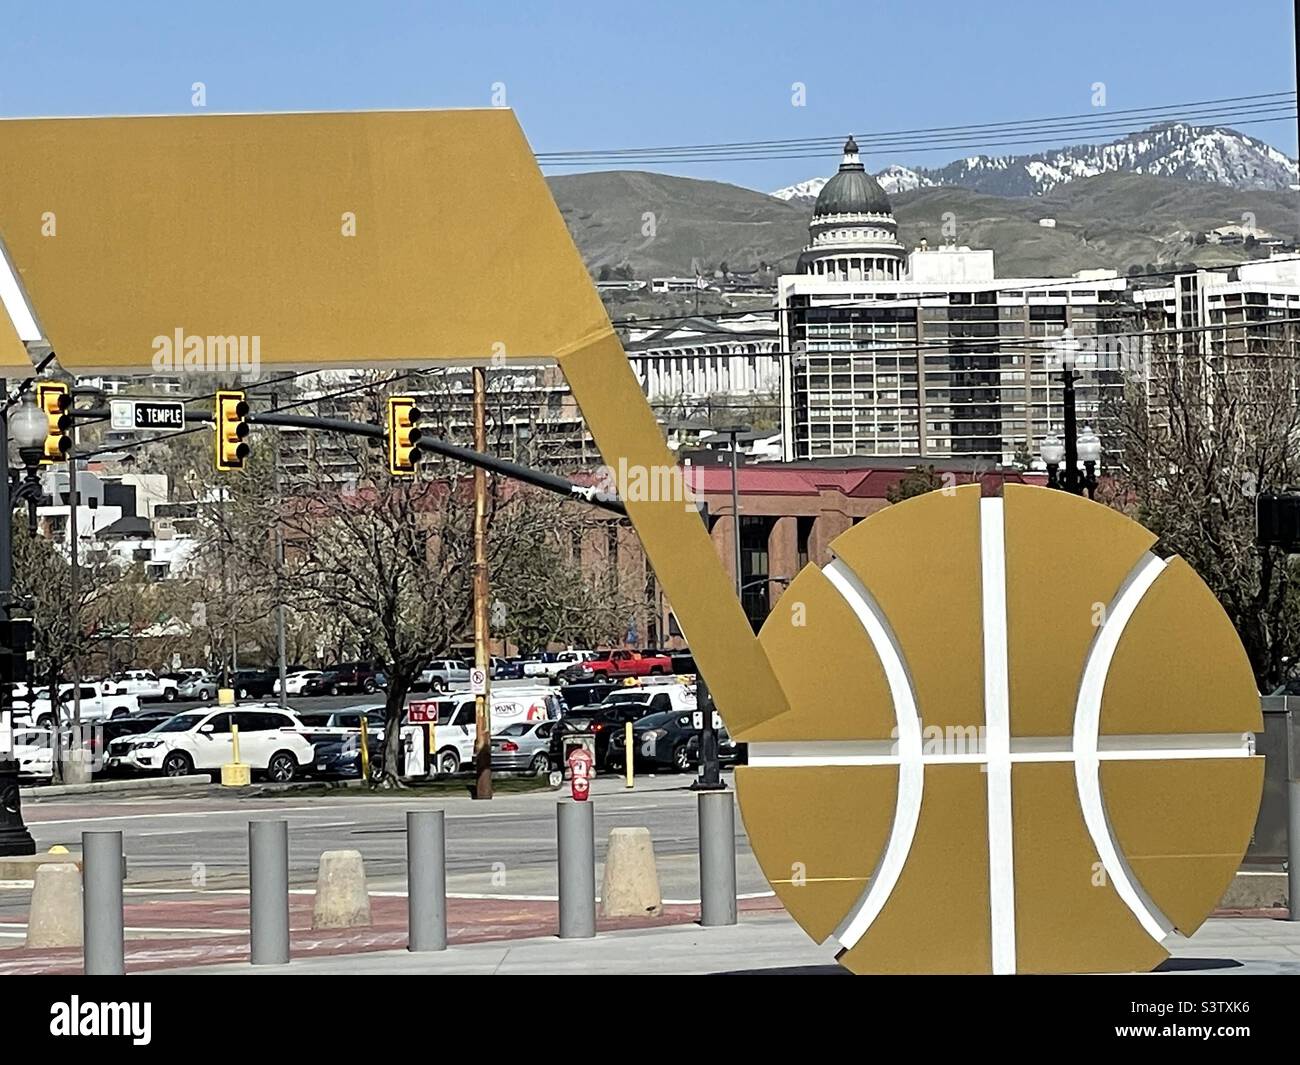 Large Utah Jazz basketball logo sets in front of the Vivint Arena, the home of The Utah Jazz in SLC, Utah, USA. Taken from behind the logo, you can see part of the downtown area and the State Capitol. Stock Photo